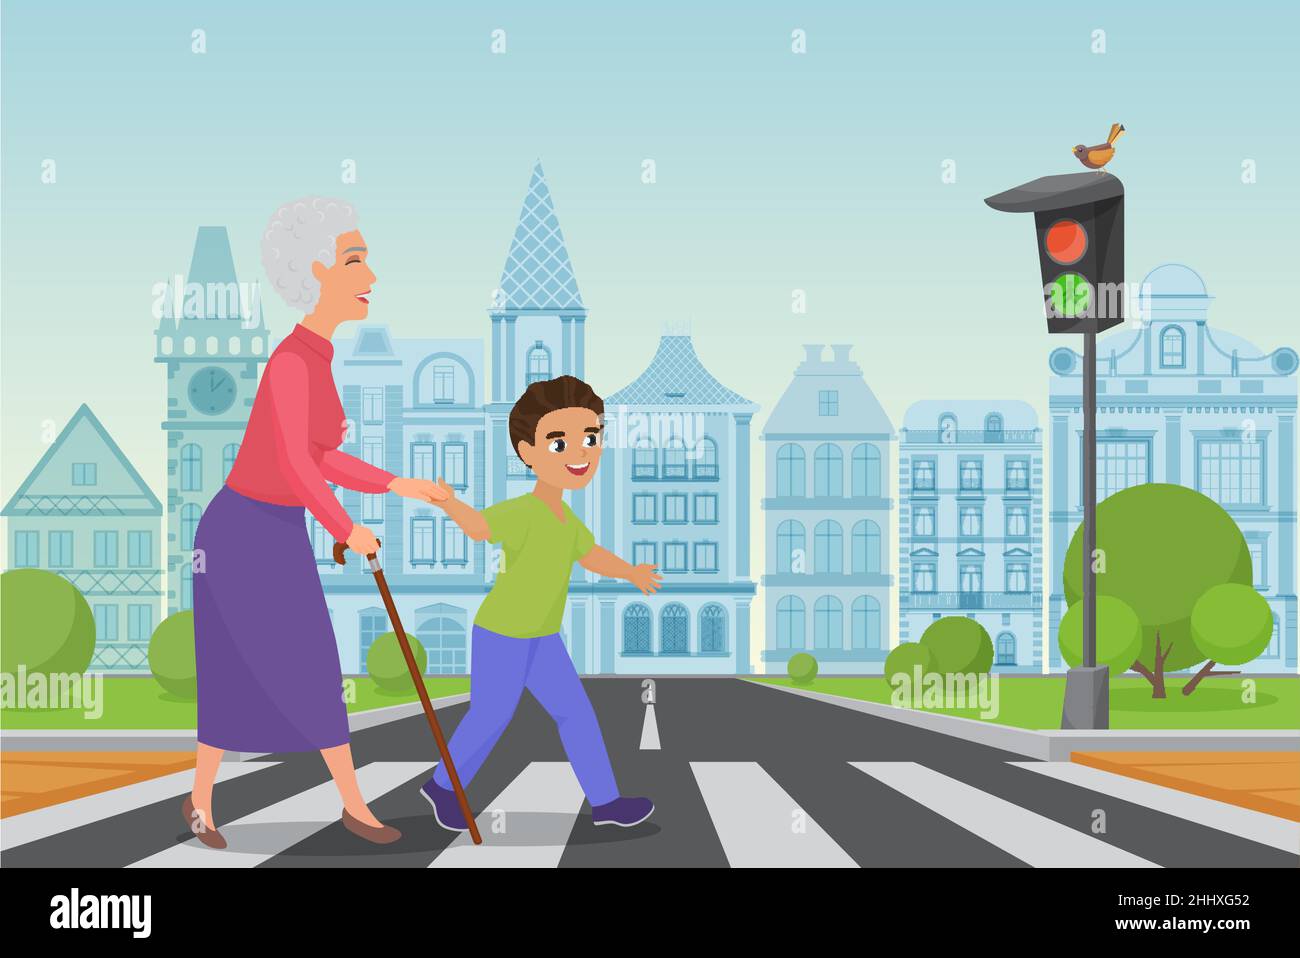 Polite little boy helps smiling old woman to pass the road at a pedestrian crossing while the green light shines. Cartoon vector illustration Stock Vector